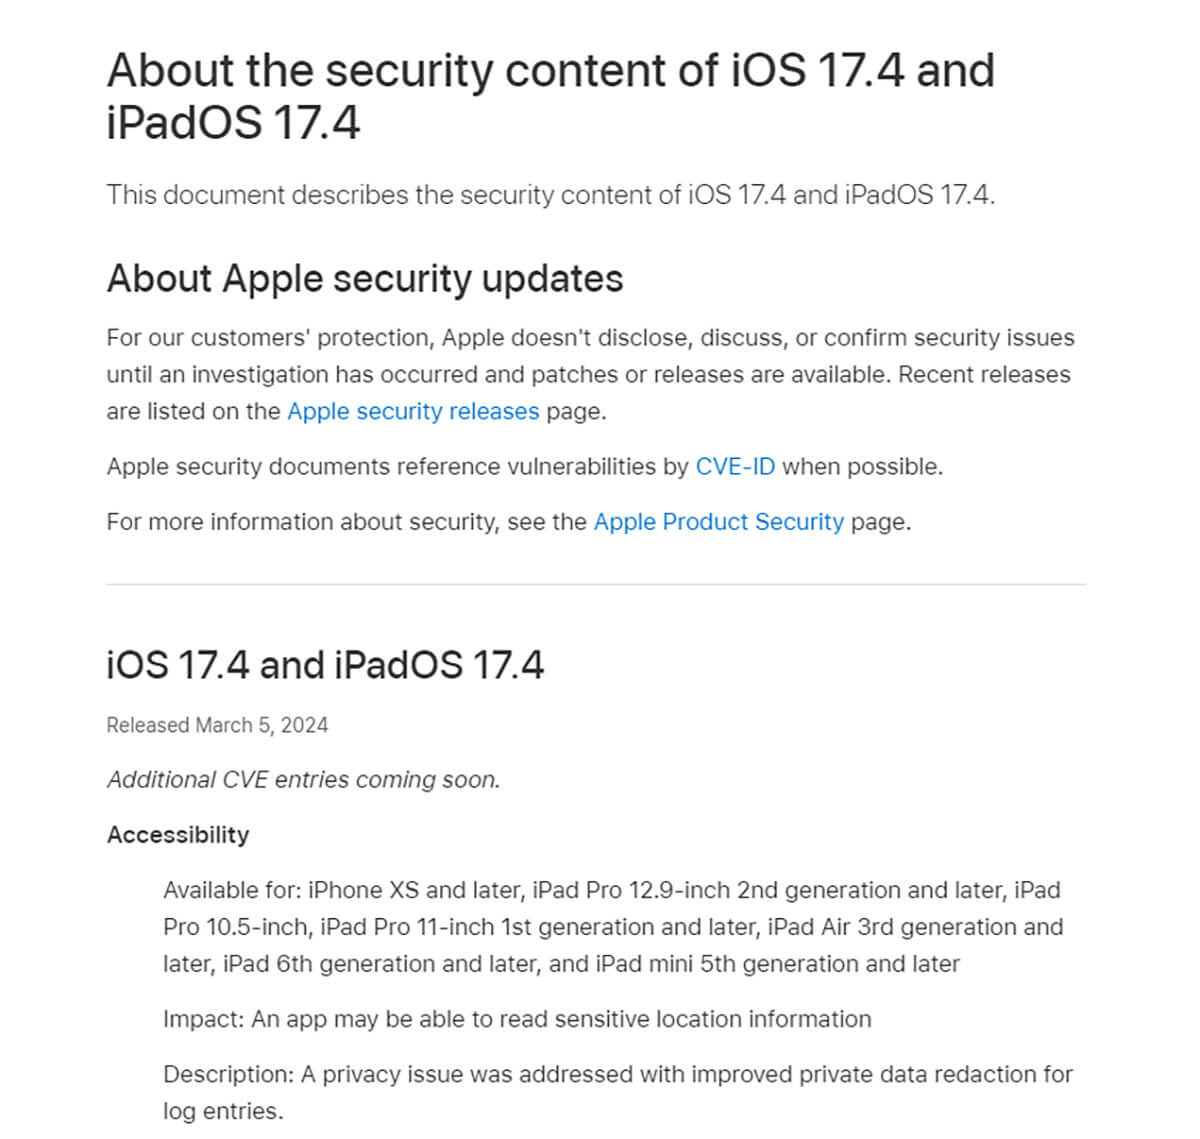 About the security content of iOS 17.4 and iPadOS 17.4